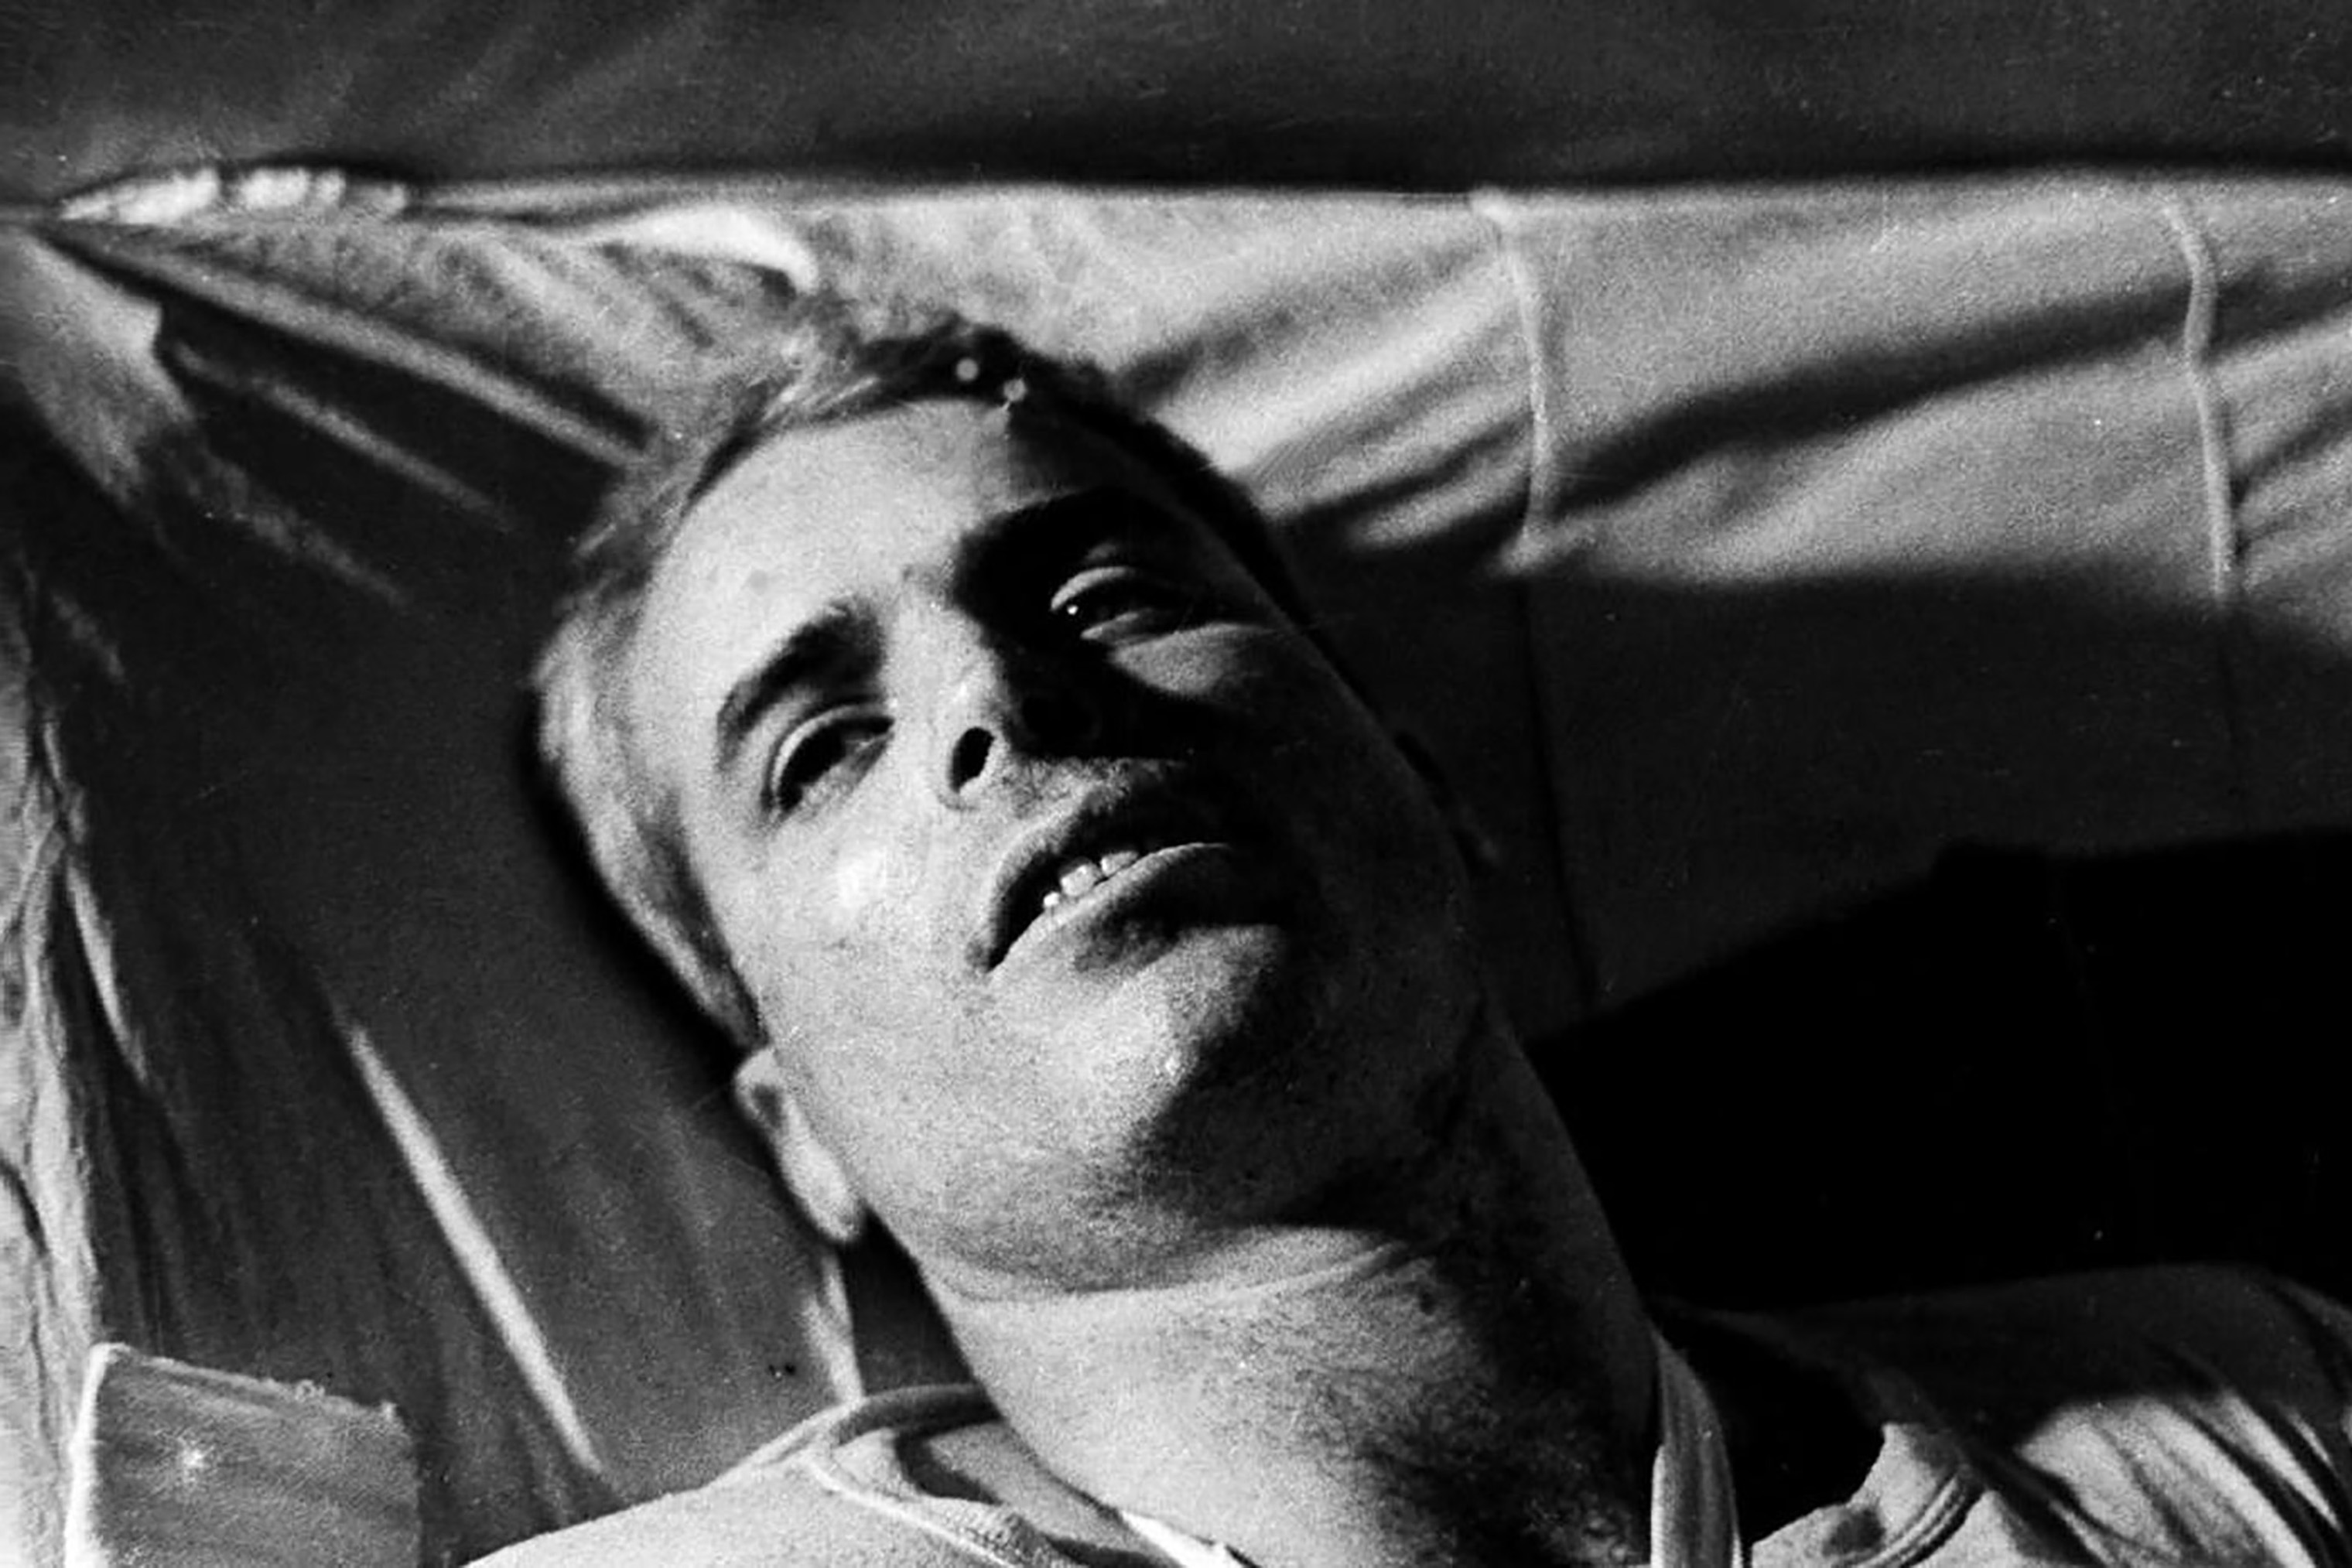 Then Navy Lieutenant Commander John McCain lying on a bed in a hospital in Hanoi, Vietnam in 1967. (AFP/Getty Images)